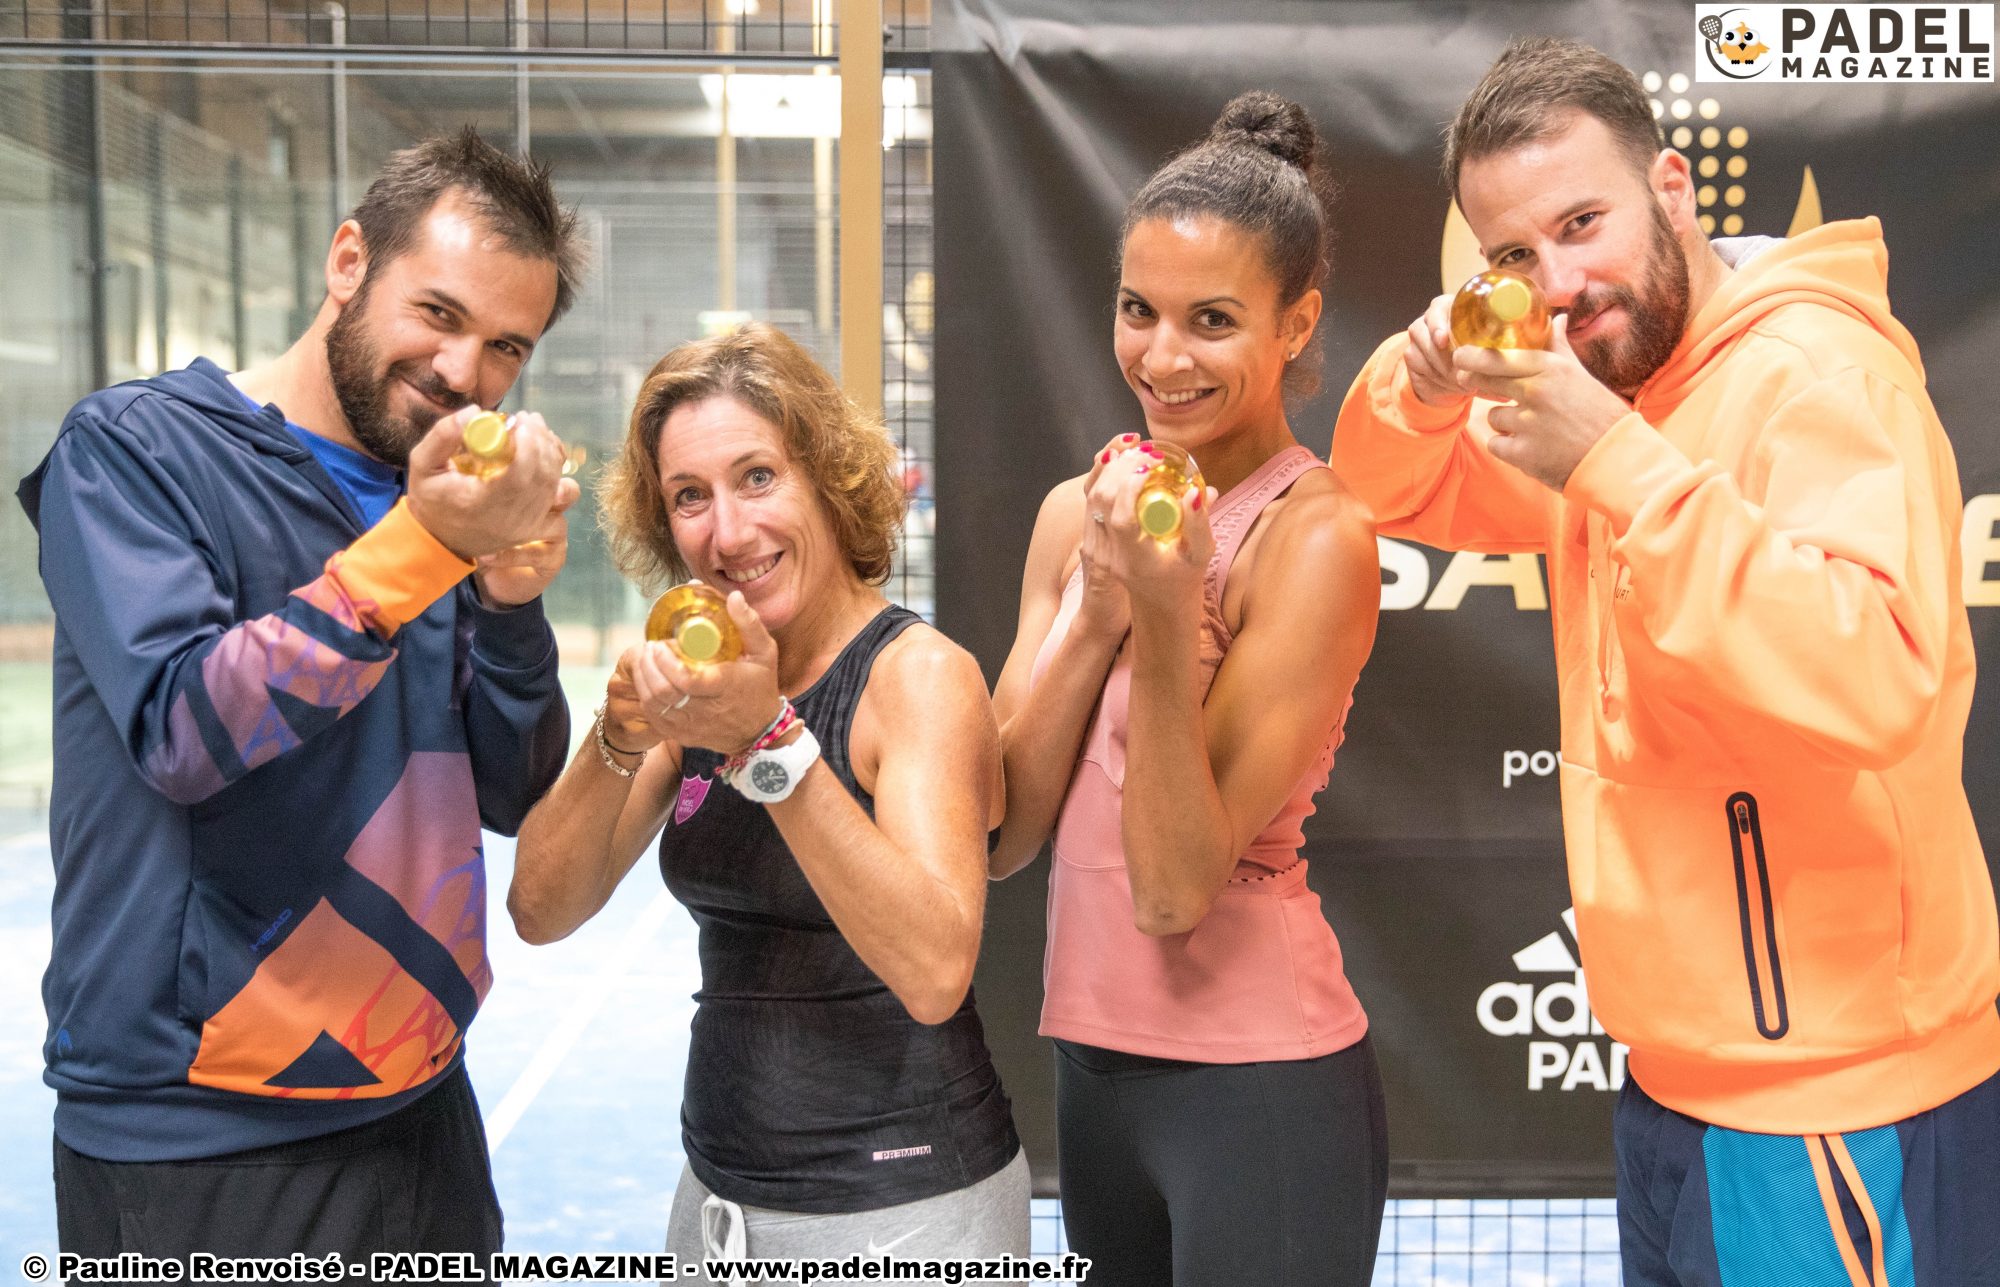 Qualified at World Padel Tour from Paris areâ € ¦